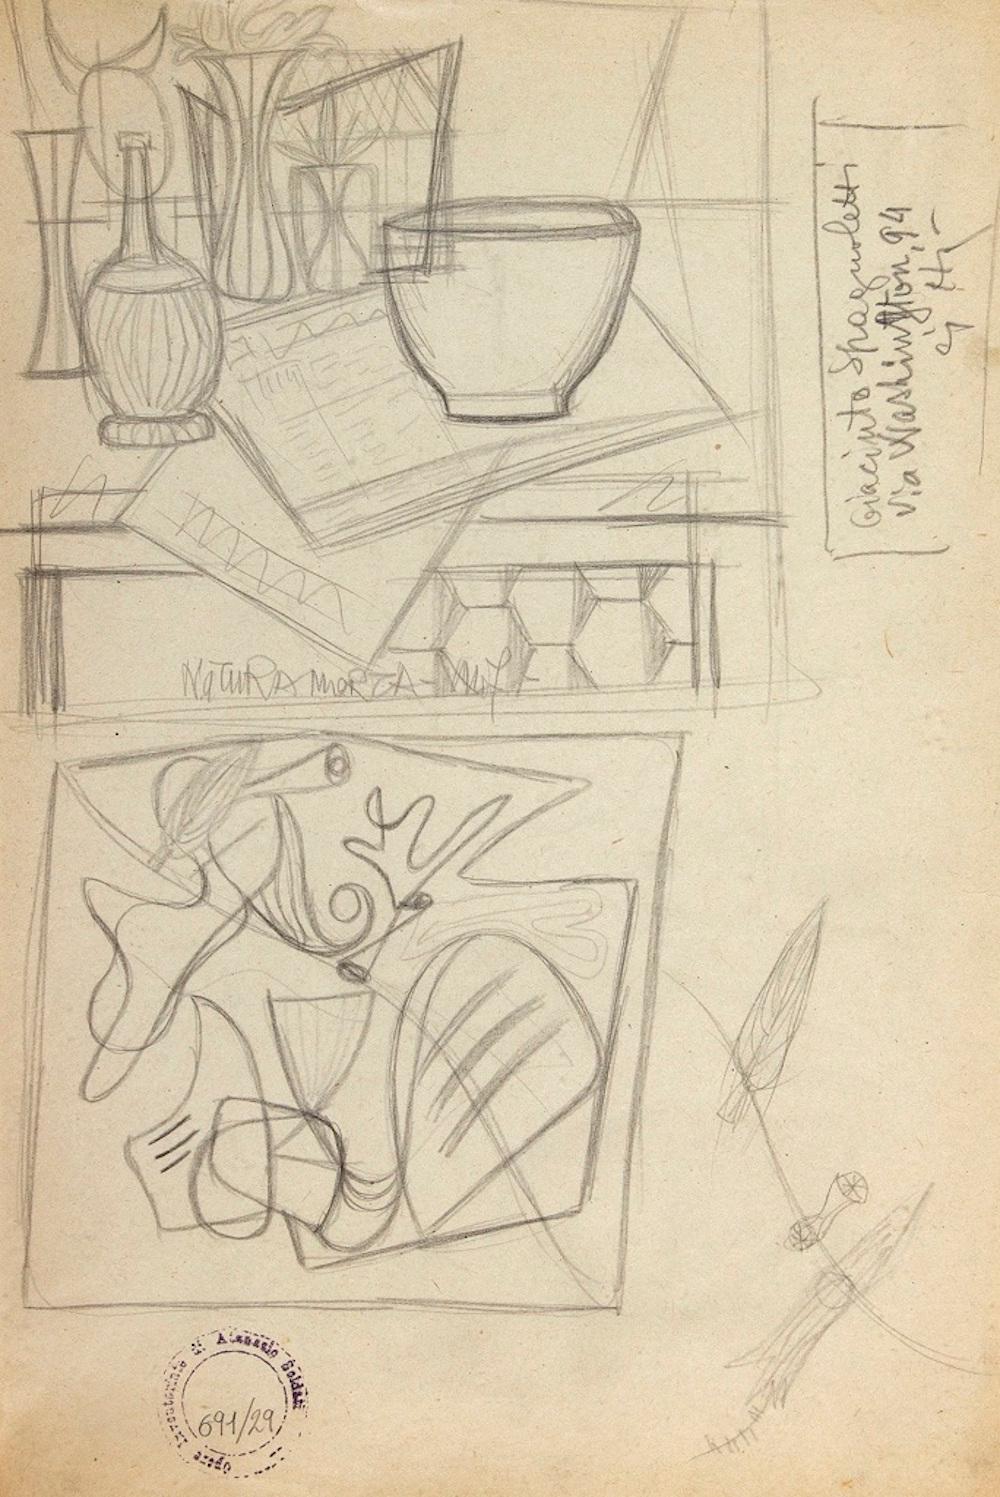 Still Life is an original drawing realized by Atanasio Soldati in the 1950s

Pencil on paper.

Stamp and archive lower left: Opere inventario Atanasio Soldati 691/29.

On the back study and some addresses.

Atanasio Soldati (Parma, 24 August 1896 -